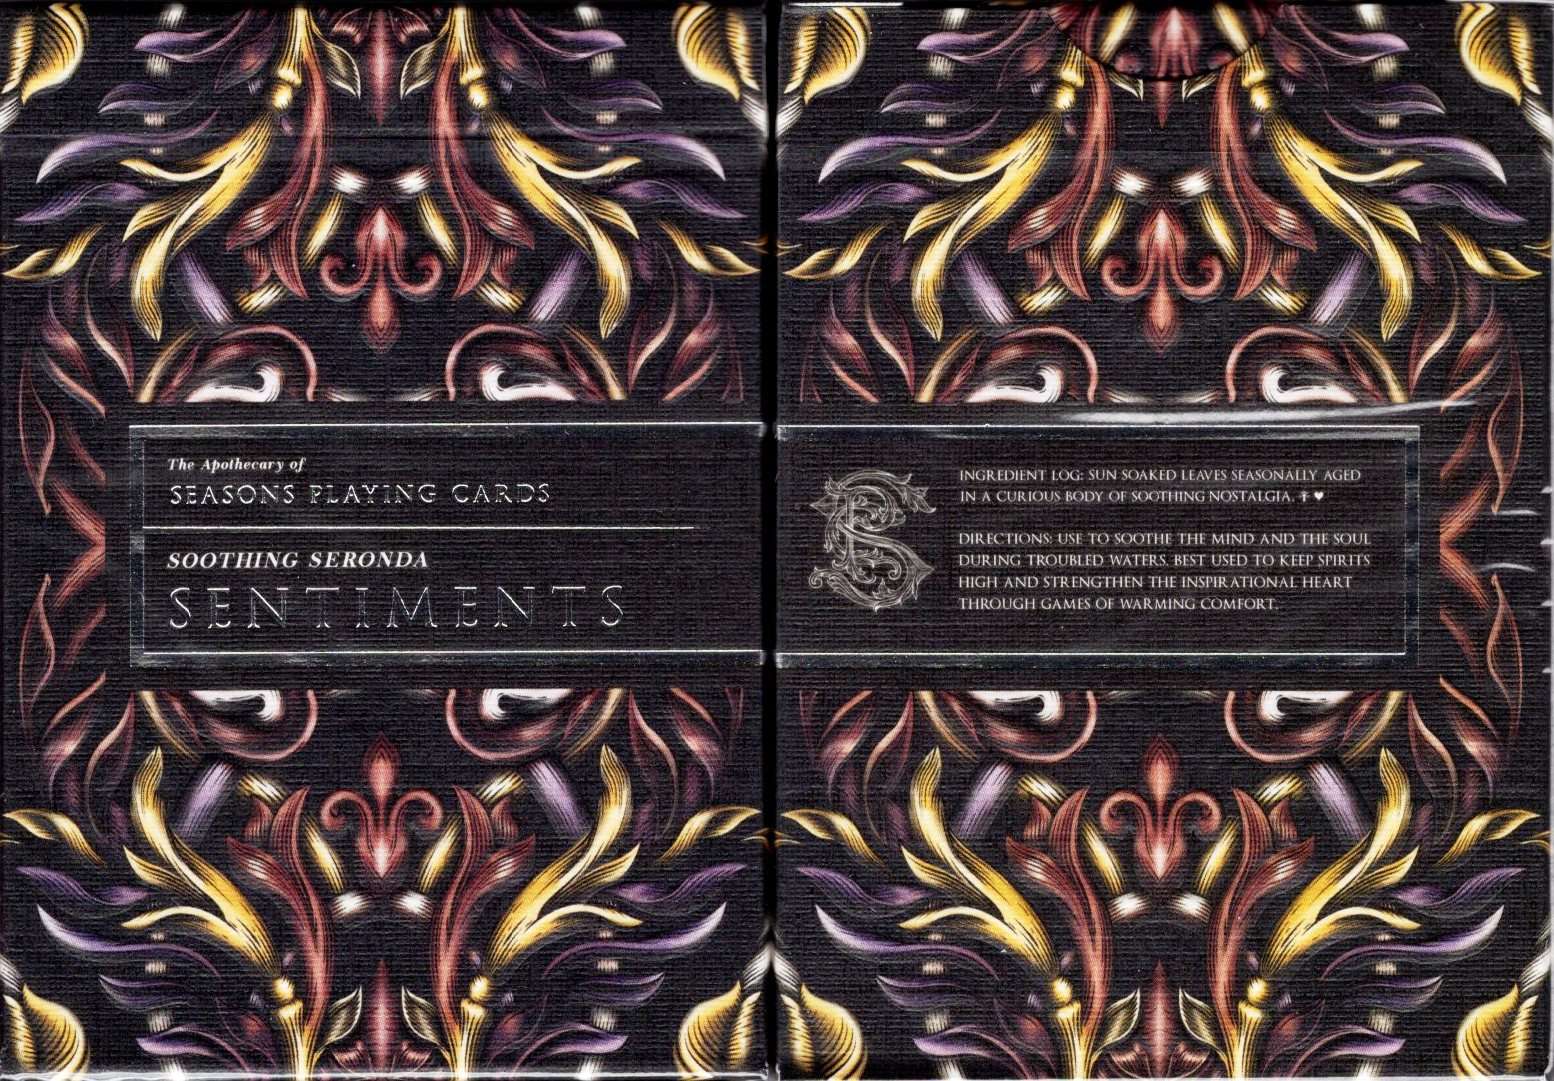 PlayingCardDecks.com-Apothecary v2 Playing Cards USPCC - Sentiments & Virtues: Sentiments